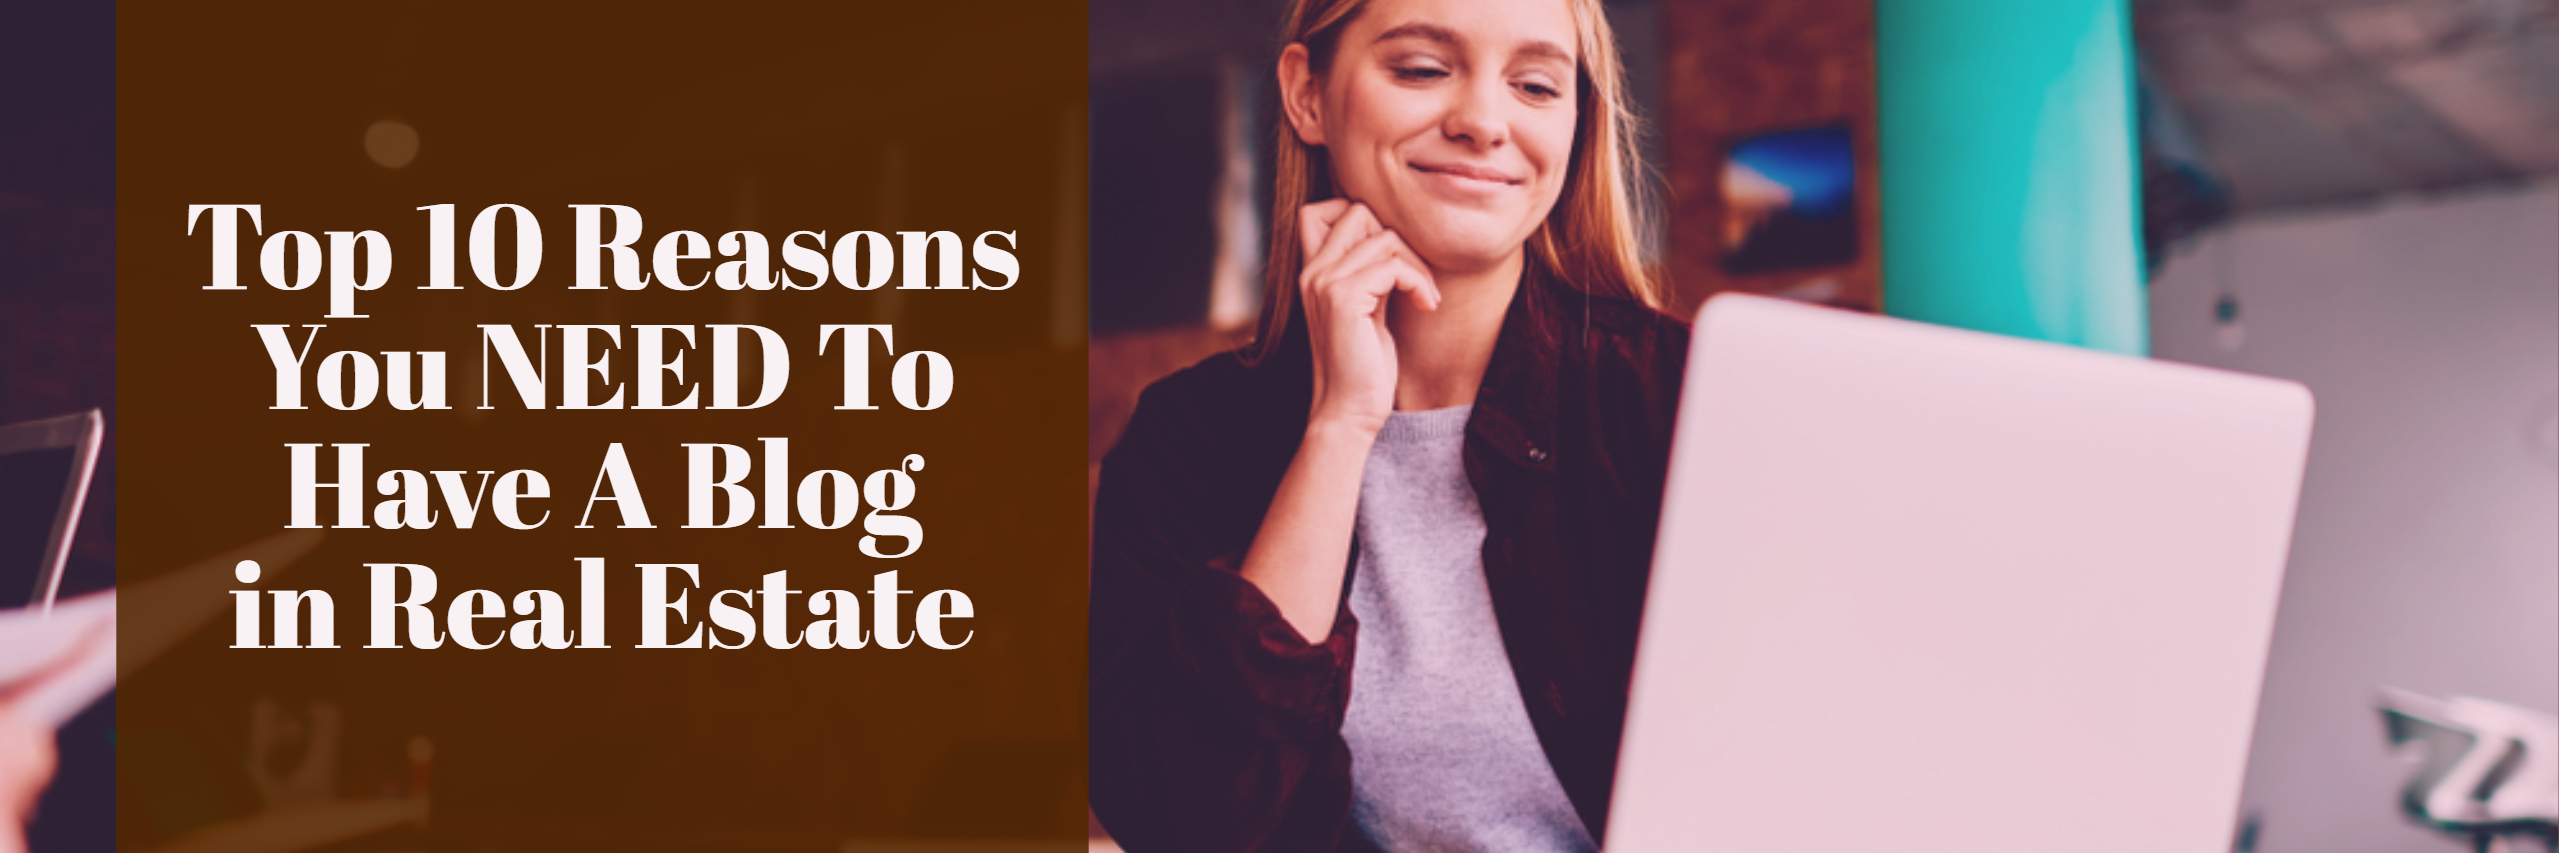 Top 10 Reasons You NEED To Have A Blog in Real Estate